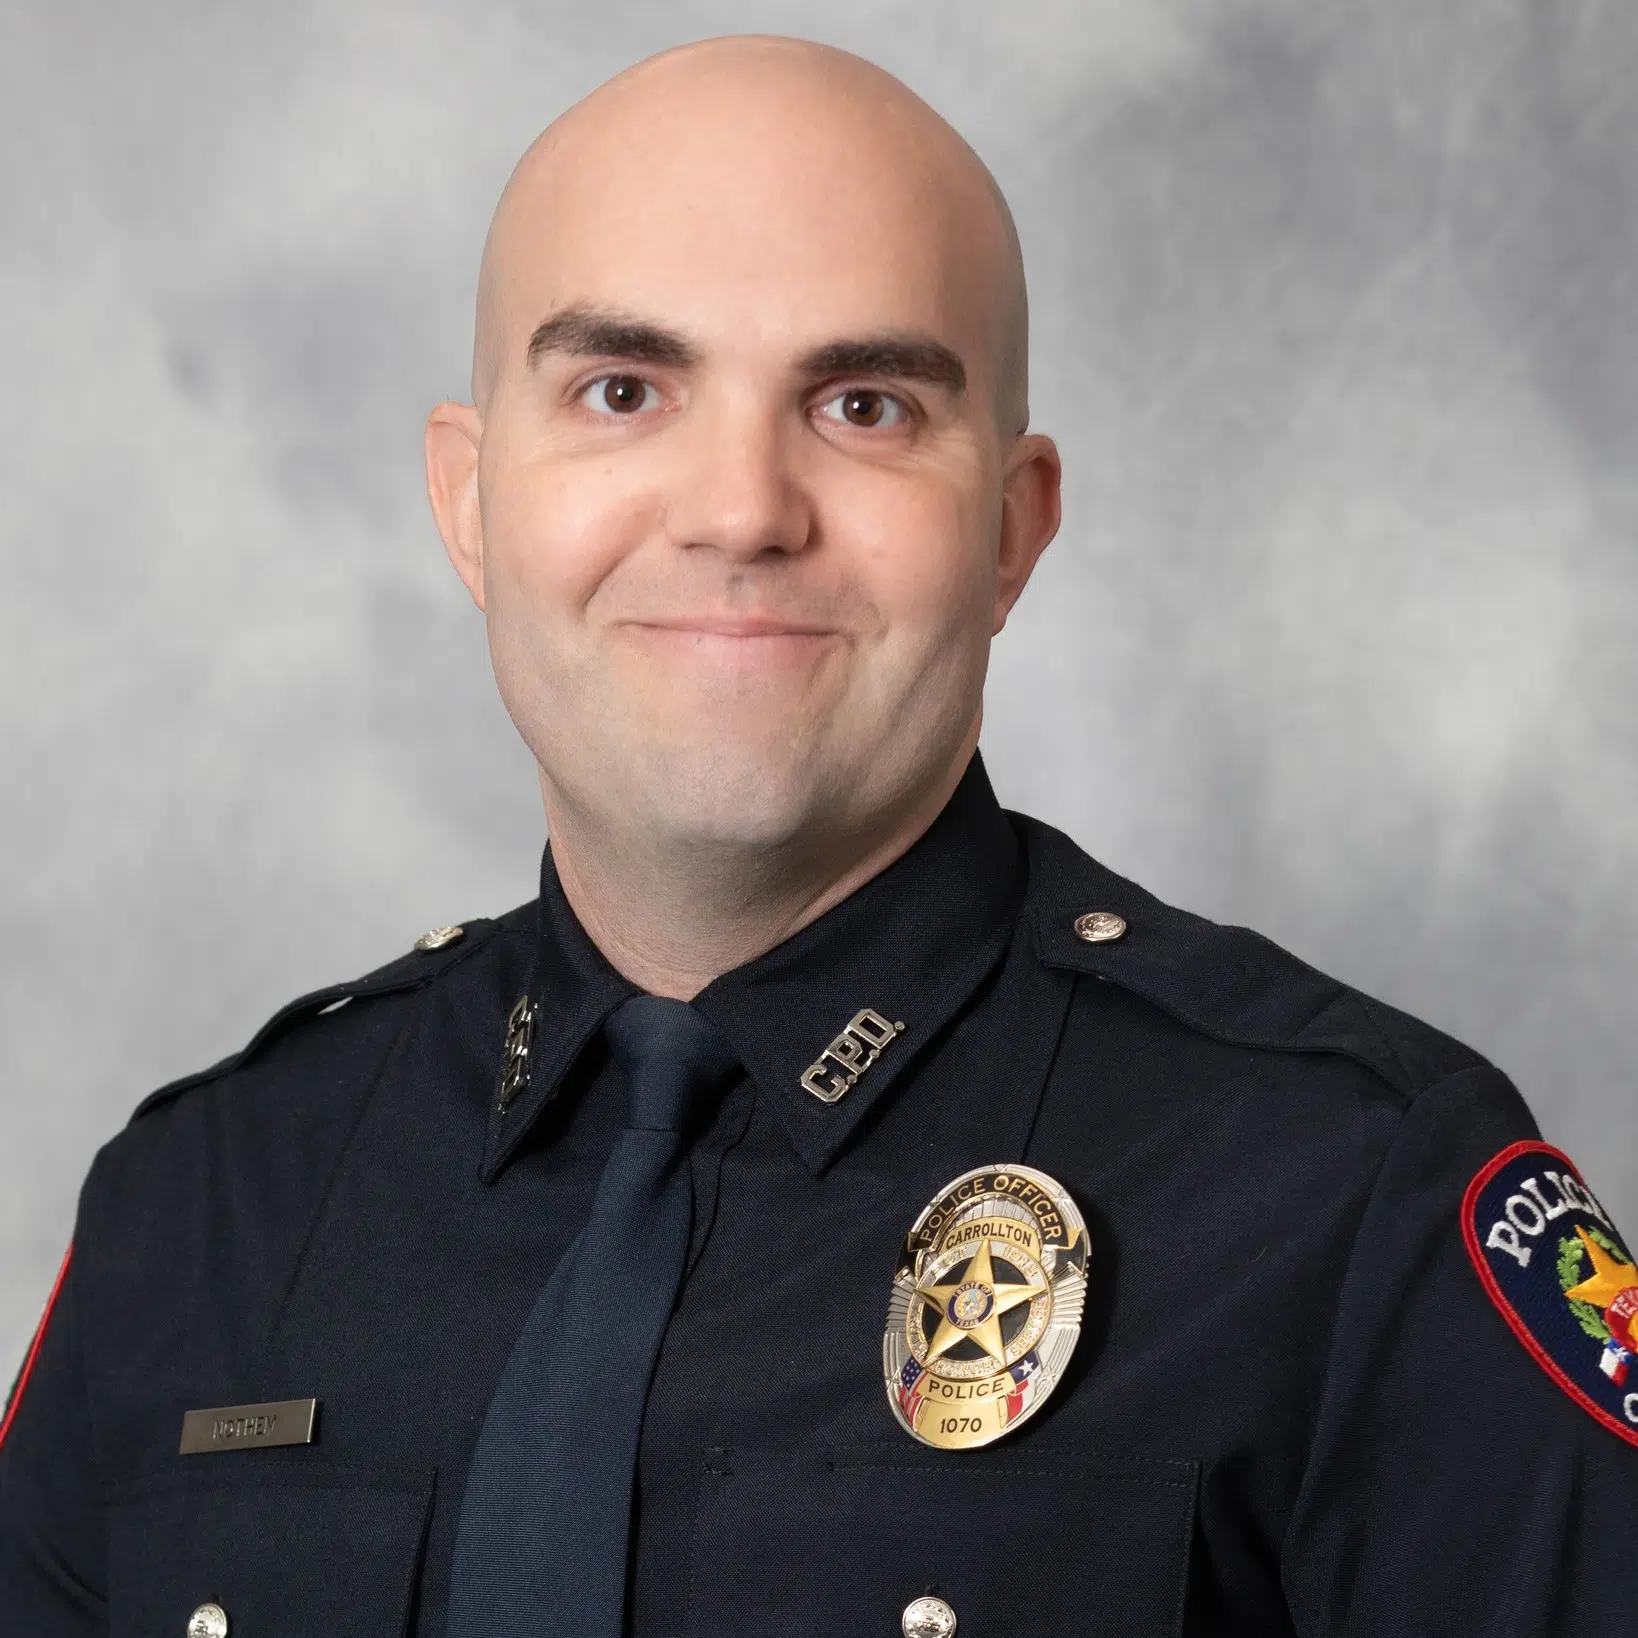 Kiel Police Department Honors Native Killed While on Duty in Texas